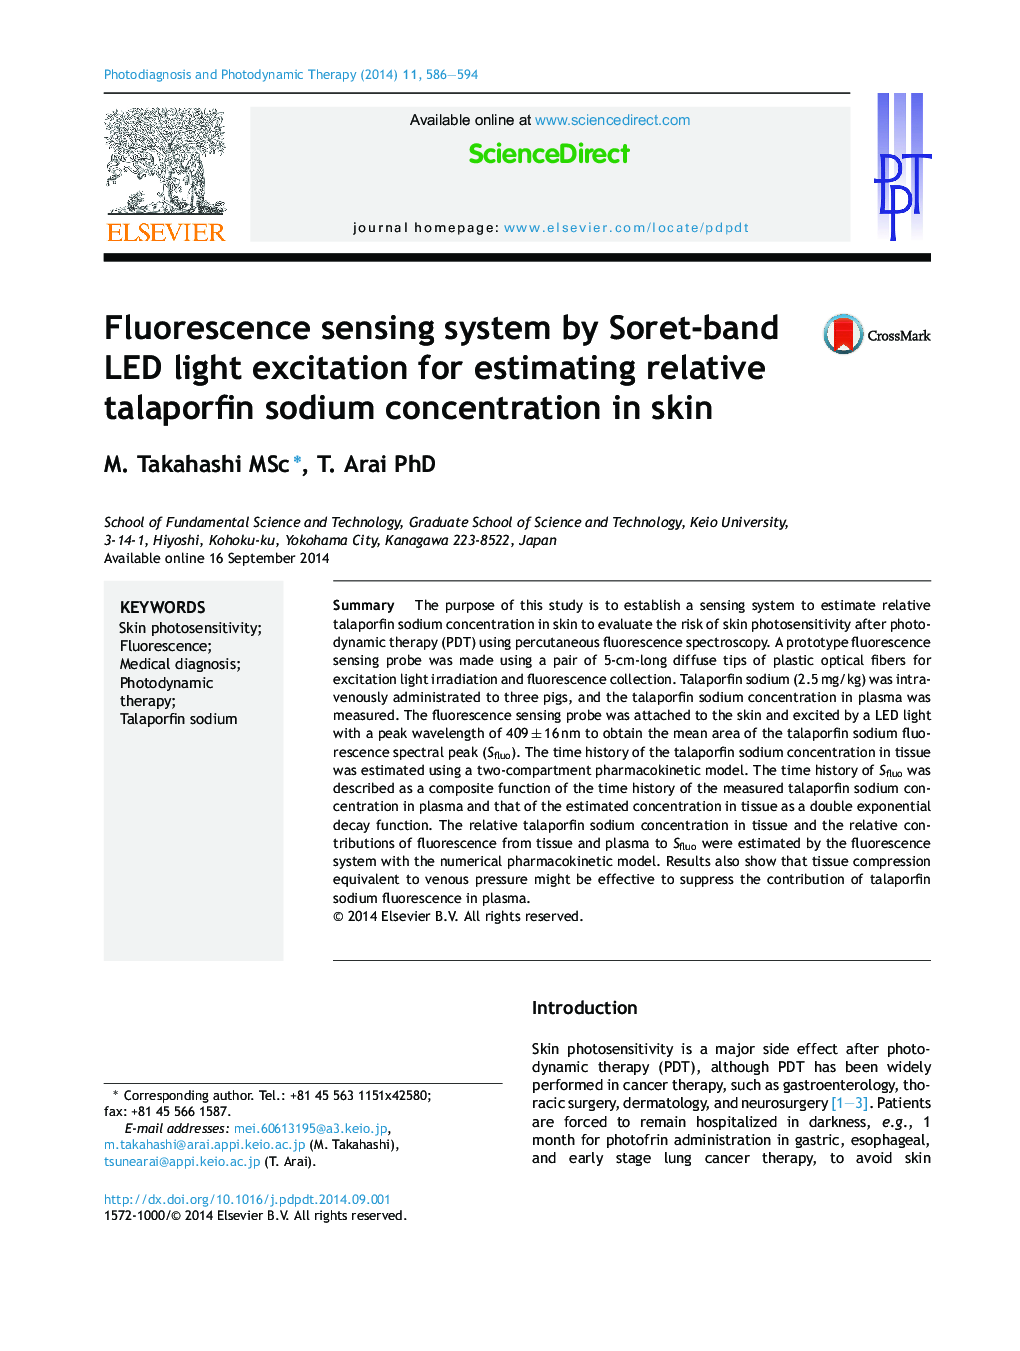 Fluorescence sensing system by Soret-band LED light excitation for estimating relative talaporfin sodium concentration in skin